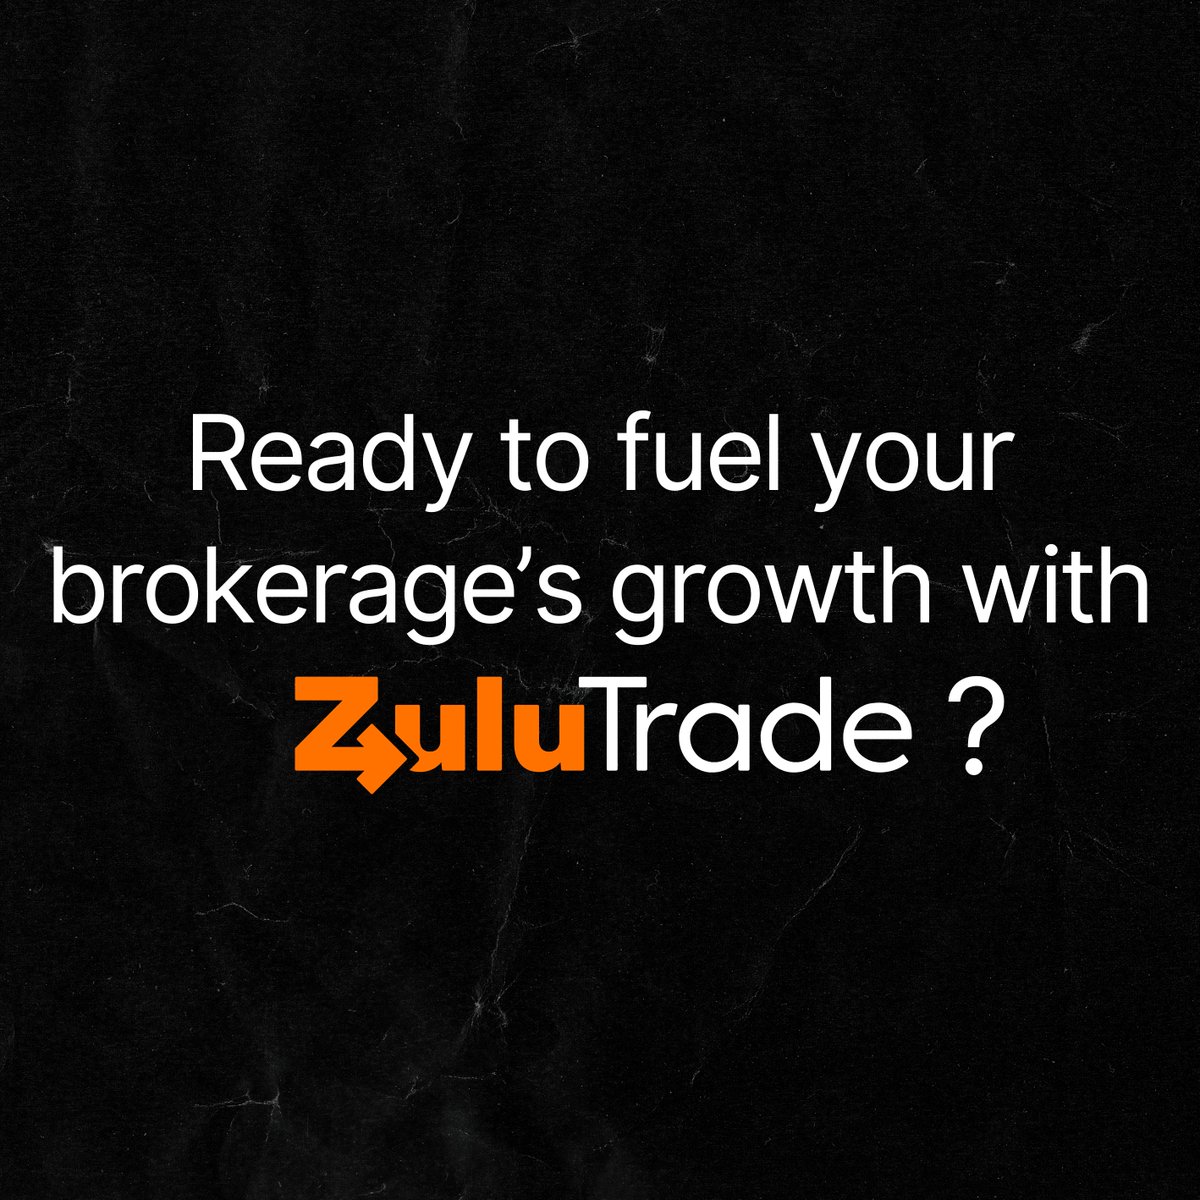 Partner with ZuluTrade and drive these growth hacks into action today! 🤝
Visit: bit.ly/3UBsSRM

#ZuluTrade #SocialTrading #BrokerPartnerships